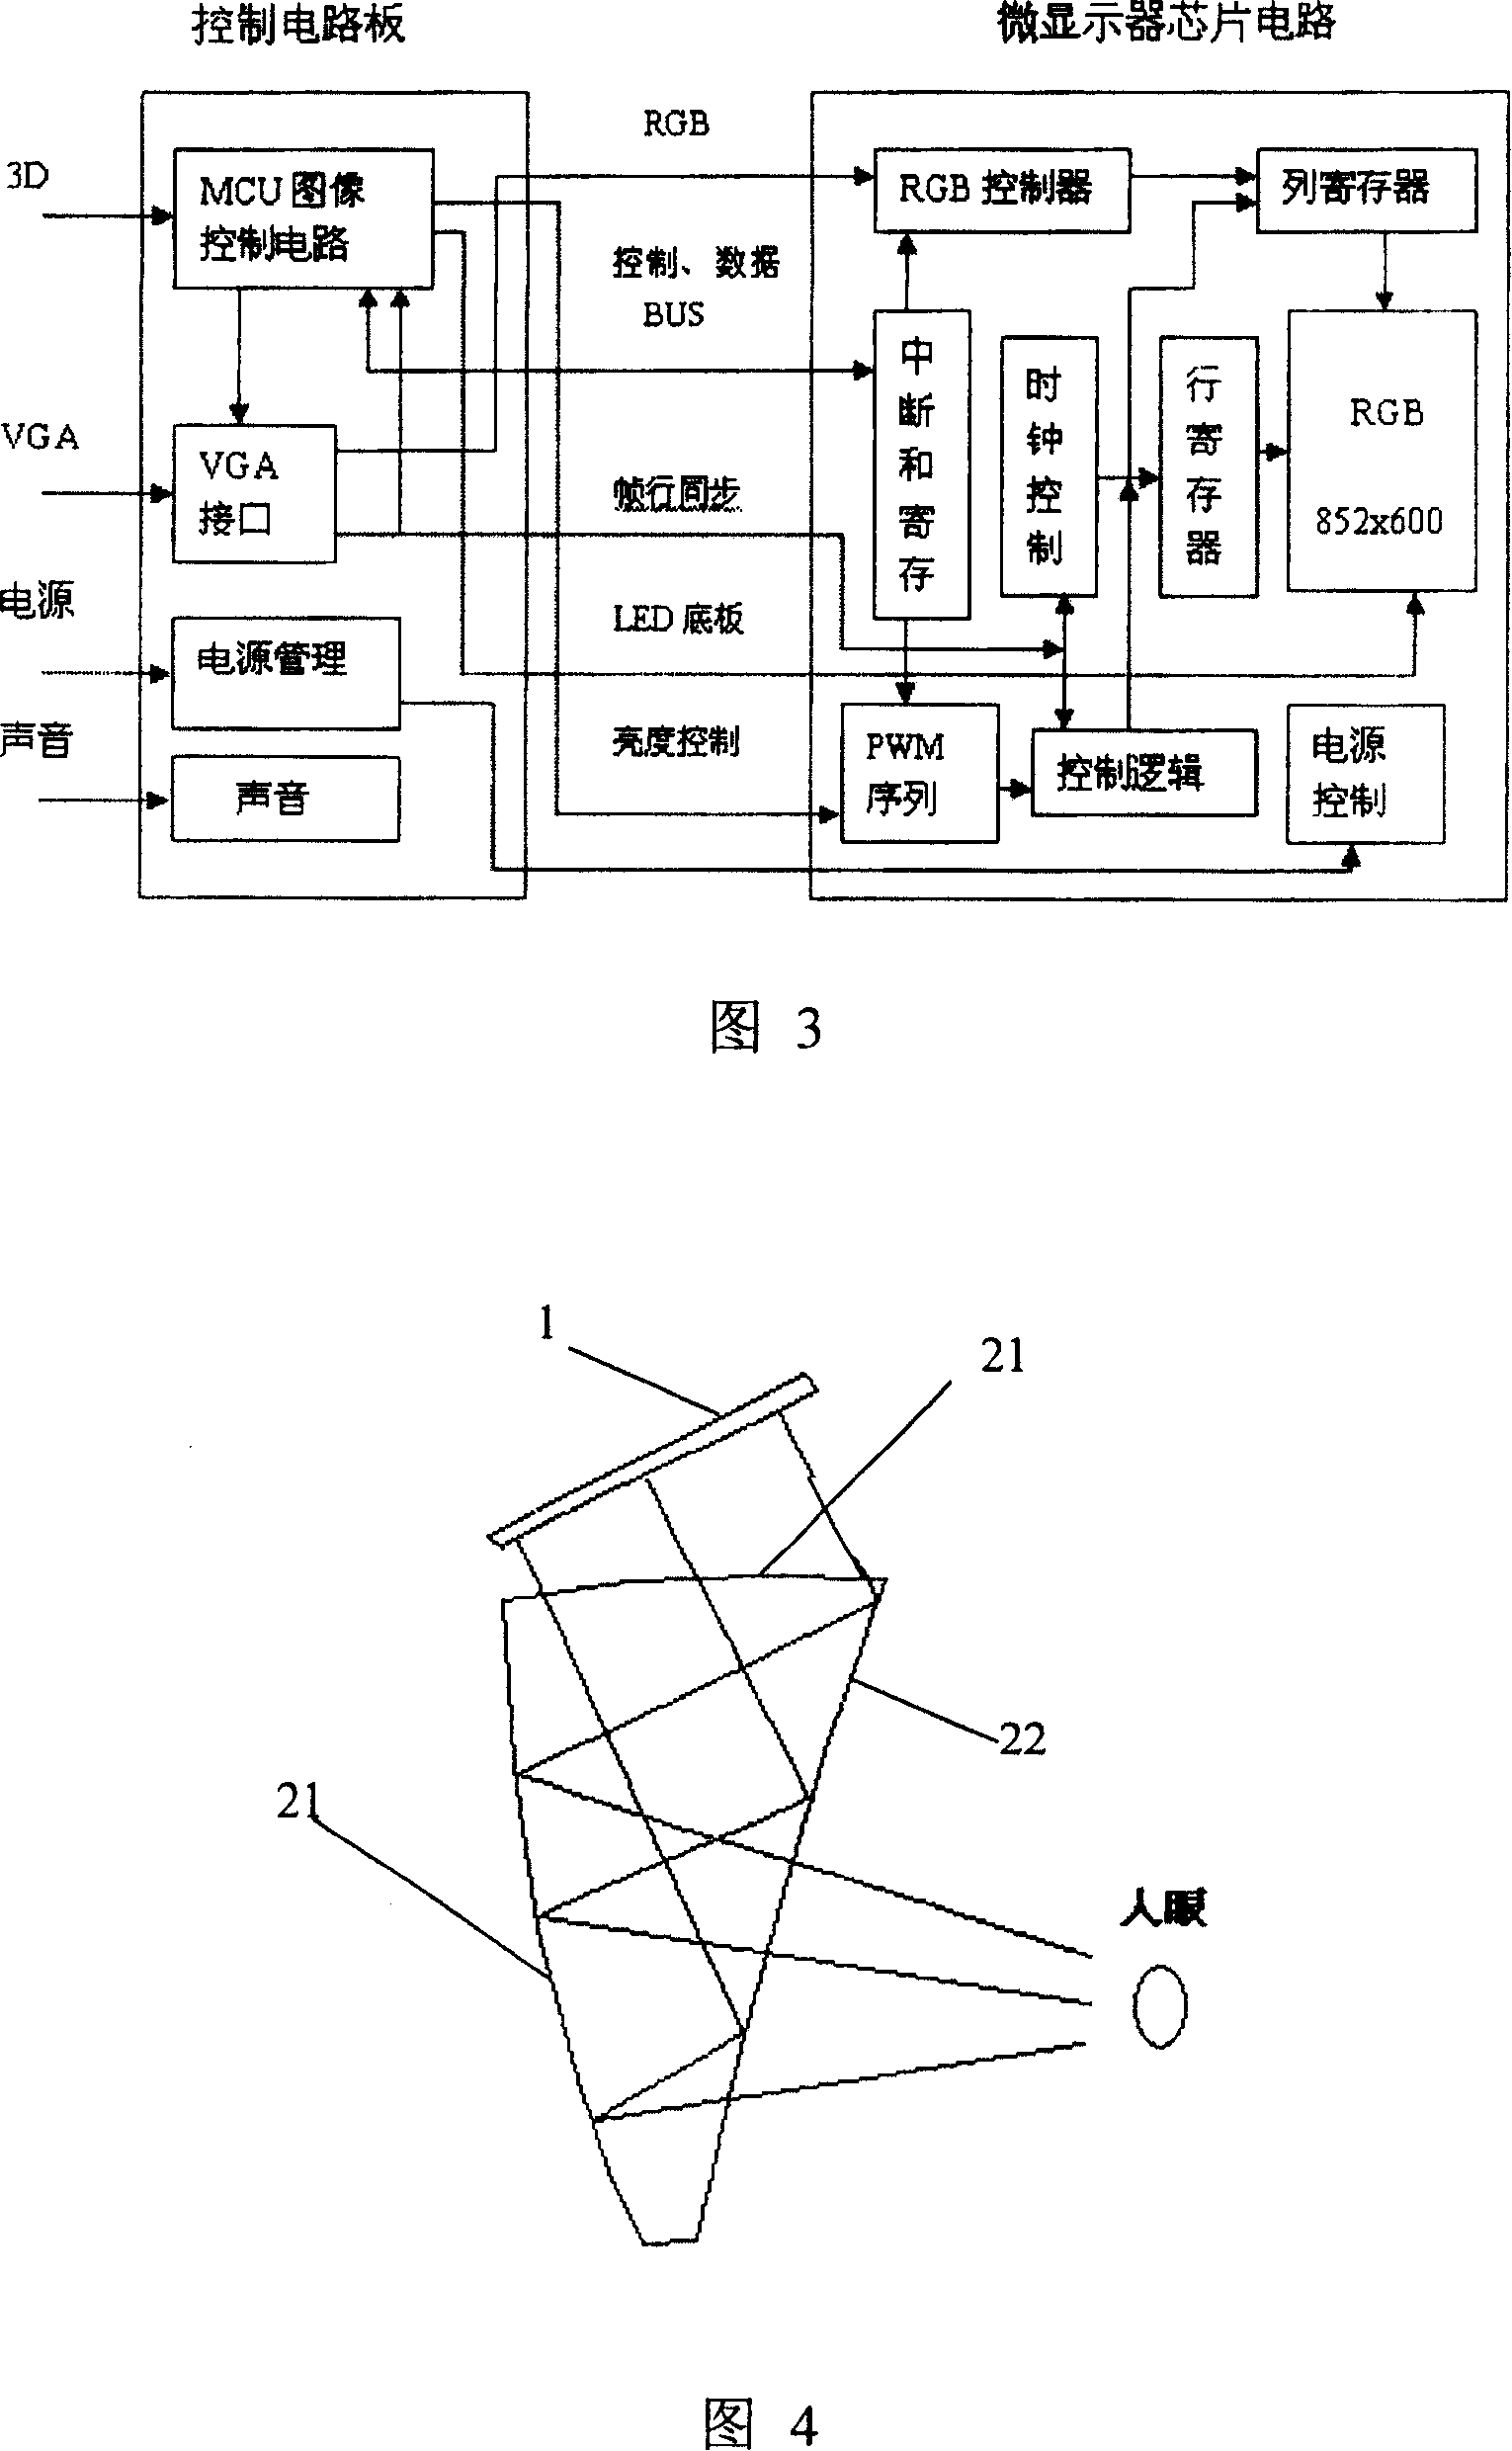 Spectacle type display device